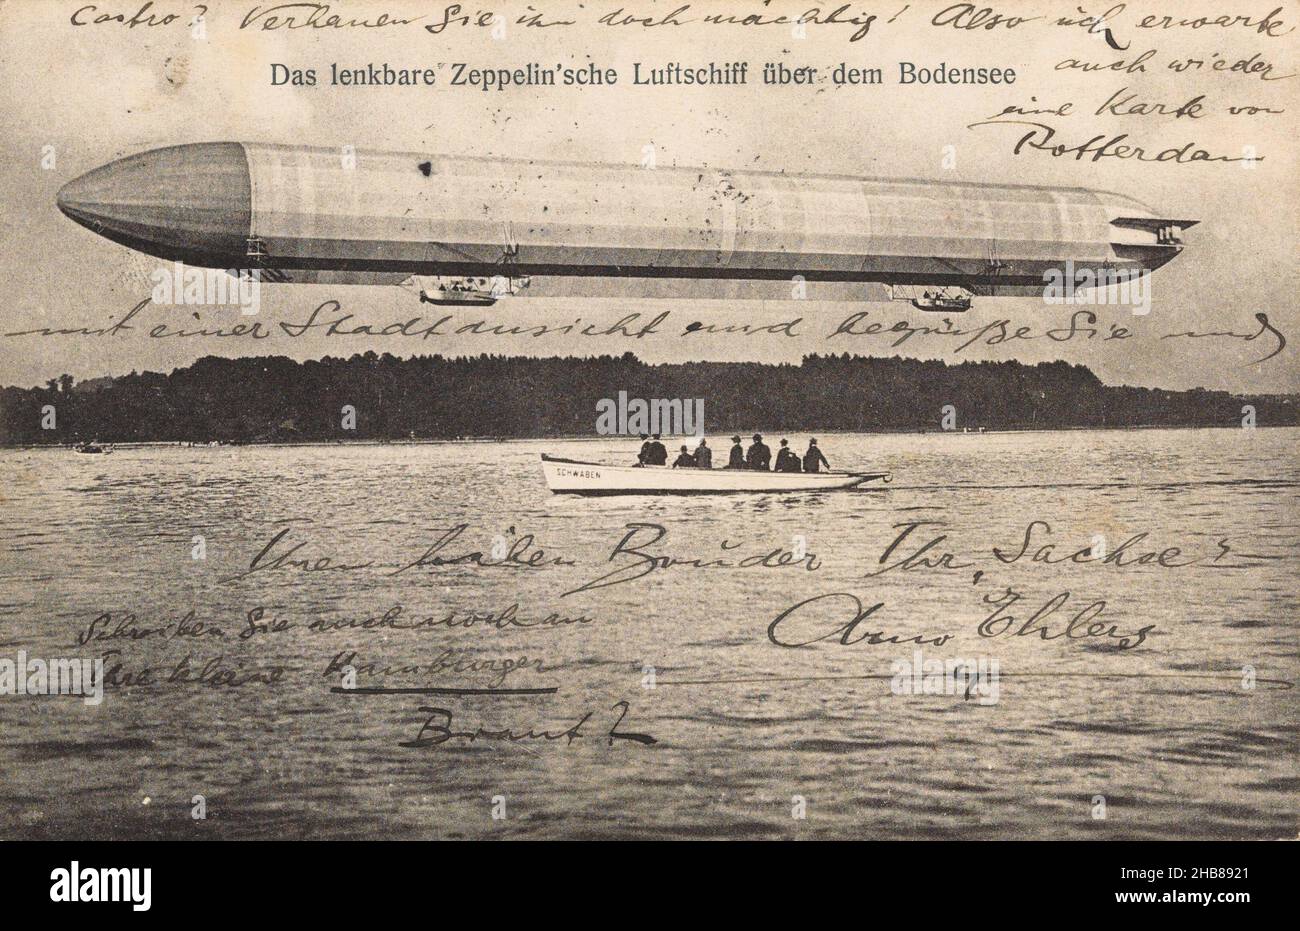 Luftschiff Zeppelin High Resolution Stock Photography and Images - Alamy